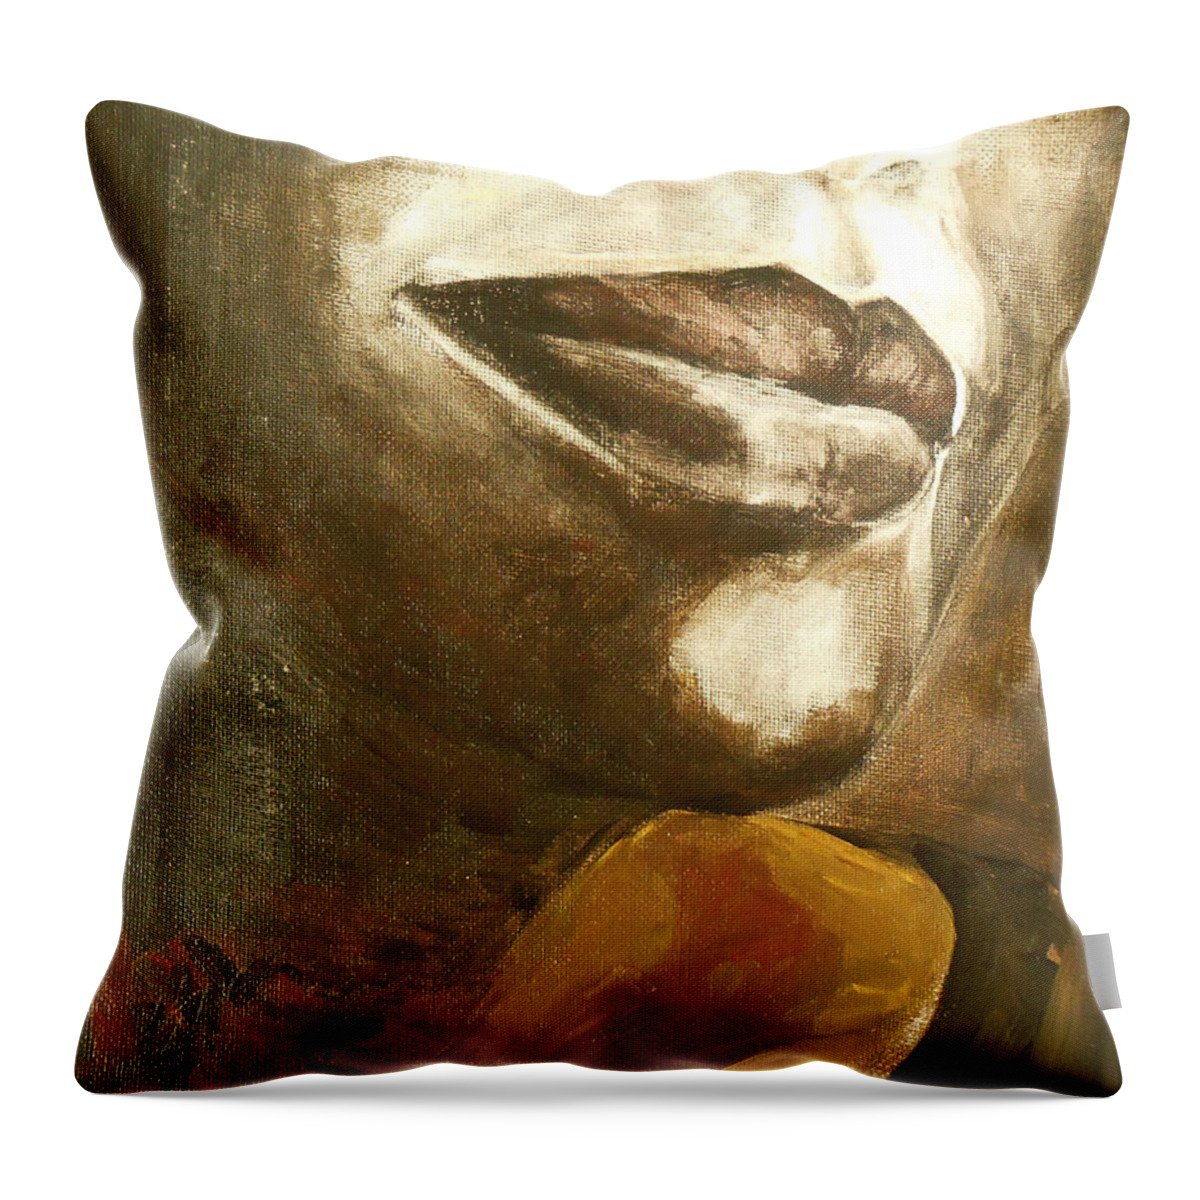 Figurative Throw Pillow featuring the painting Curves by Jane See